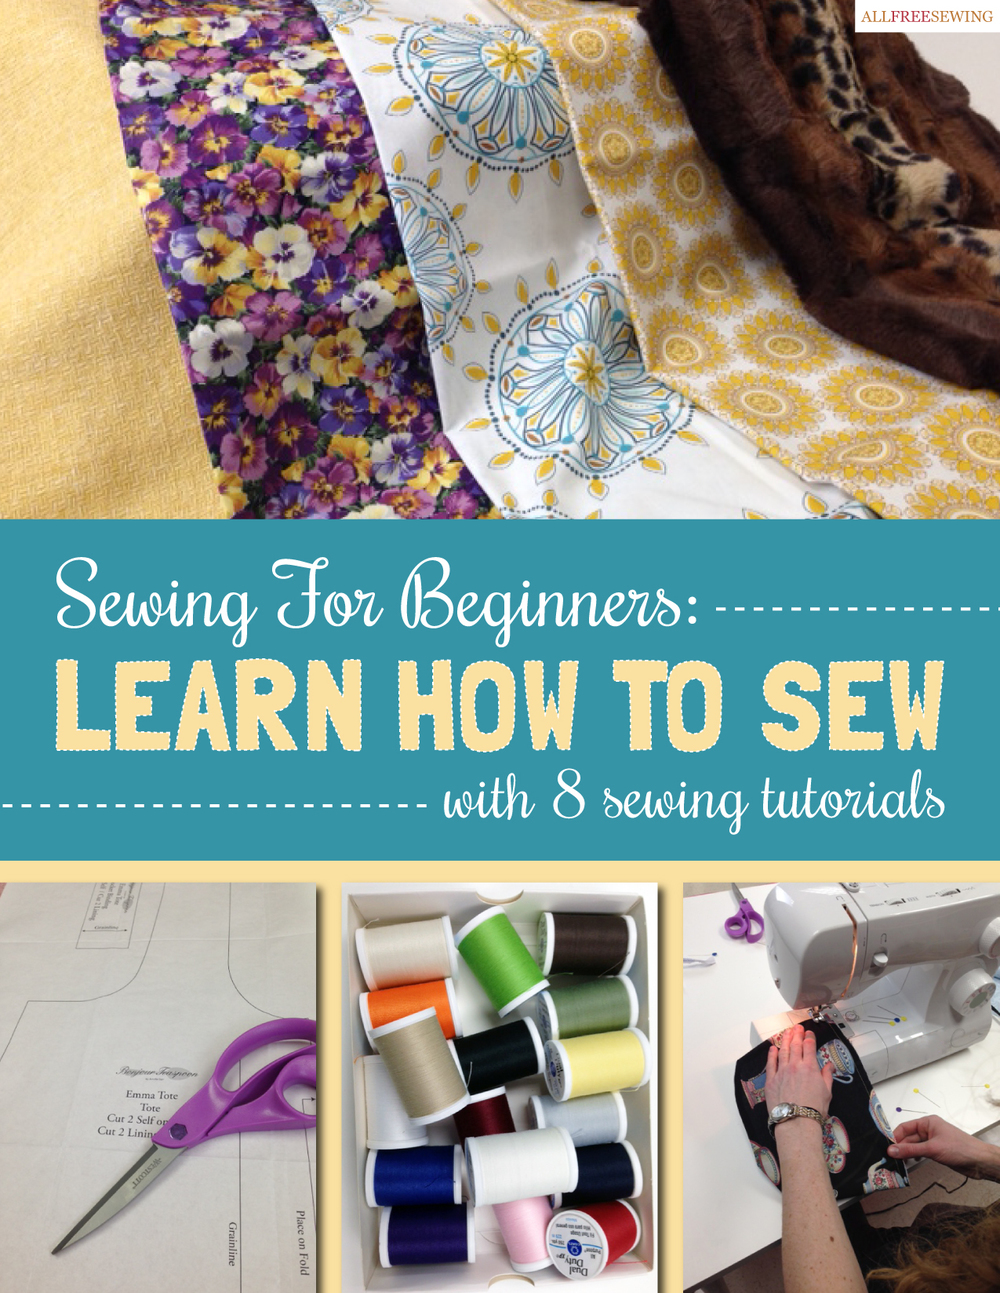 6 Tips for Learning to Sew Without Patterns - Resources for a